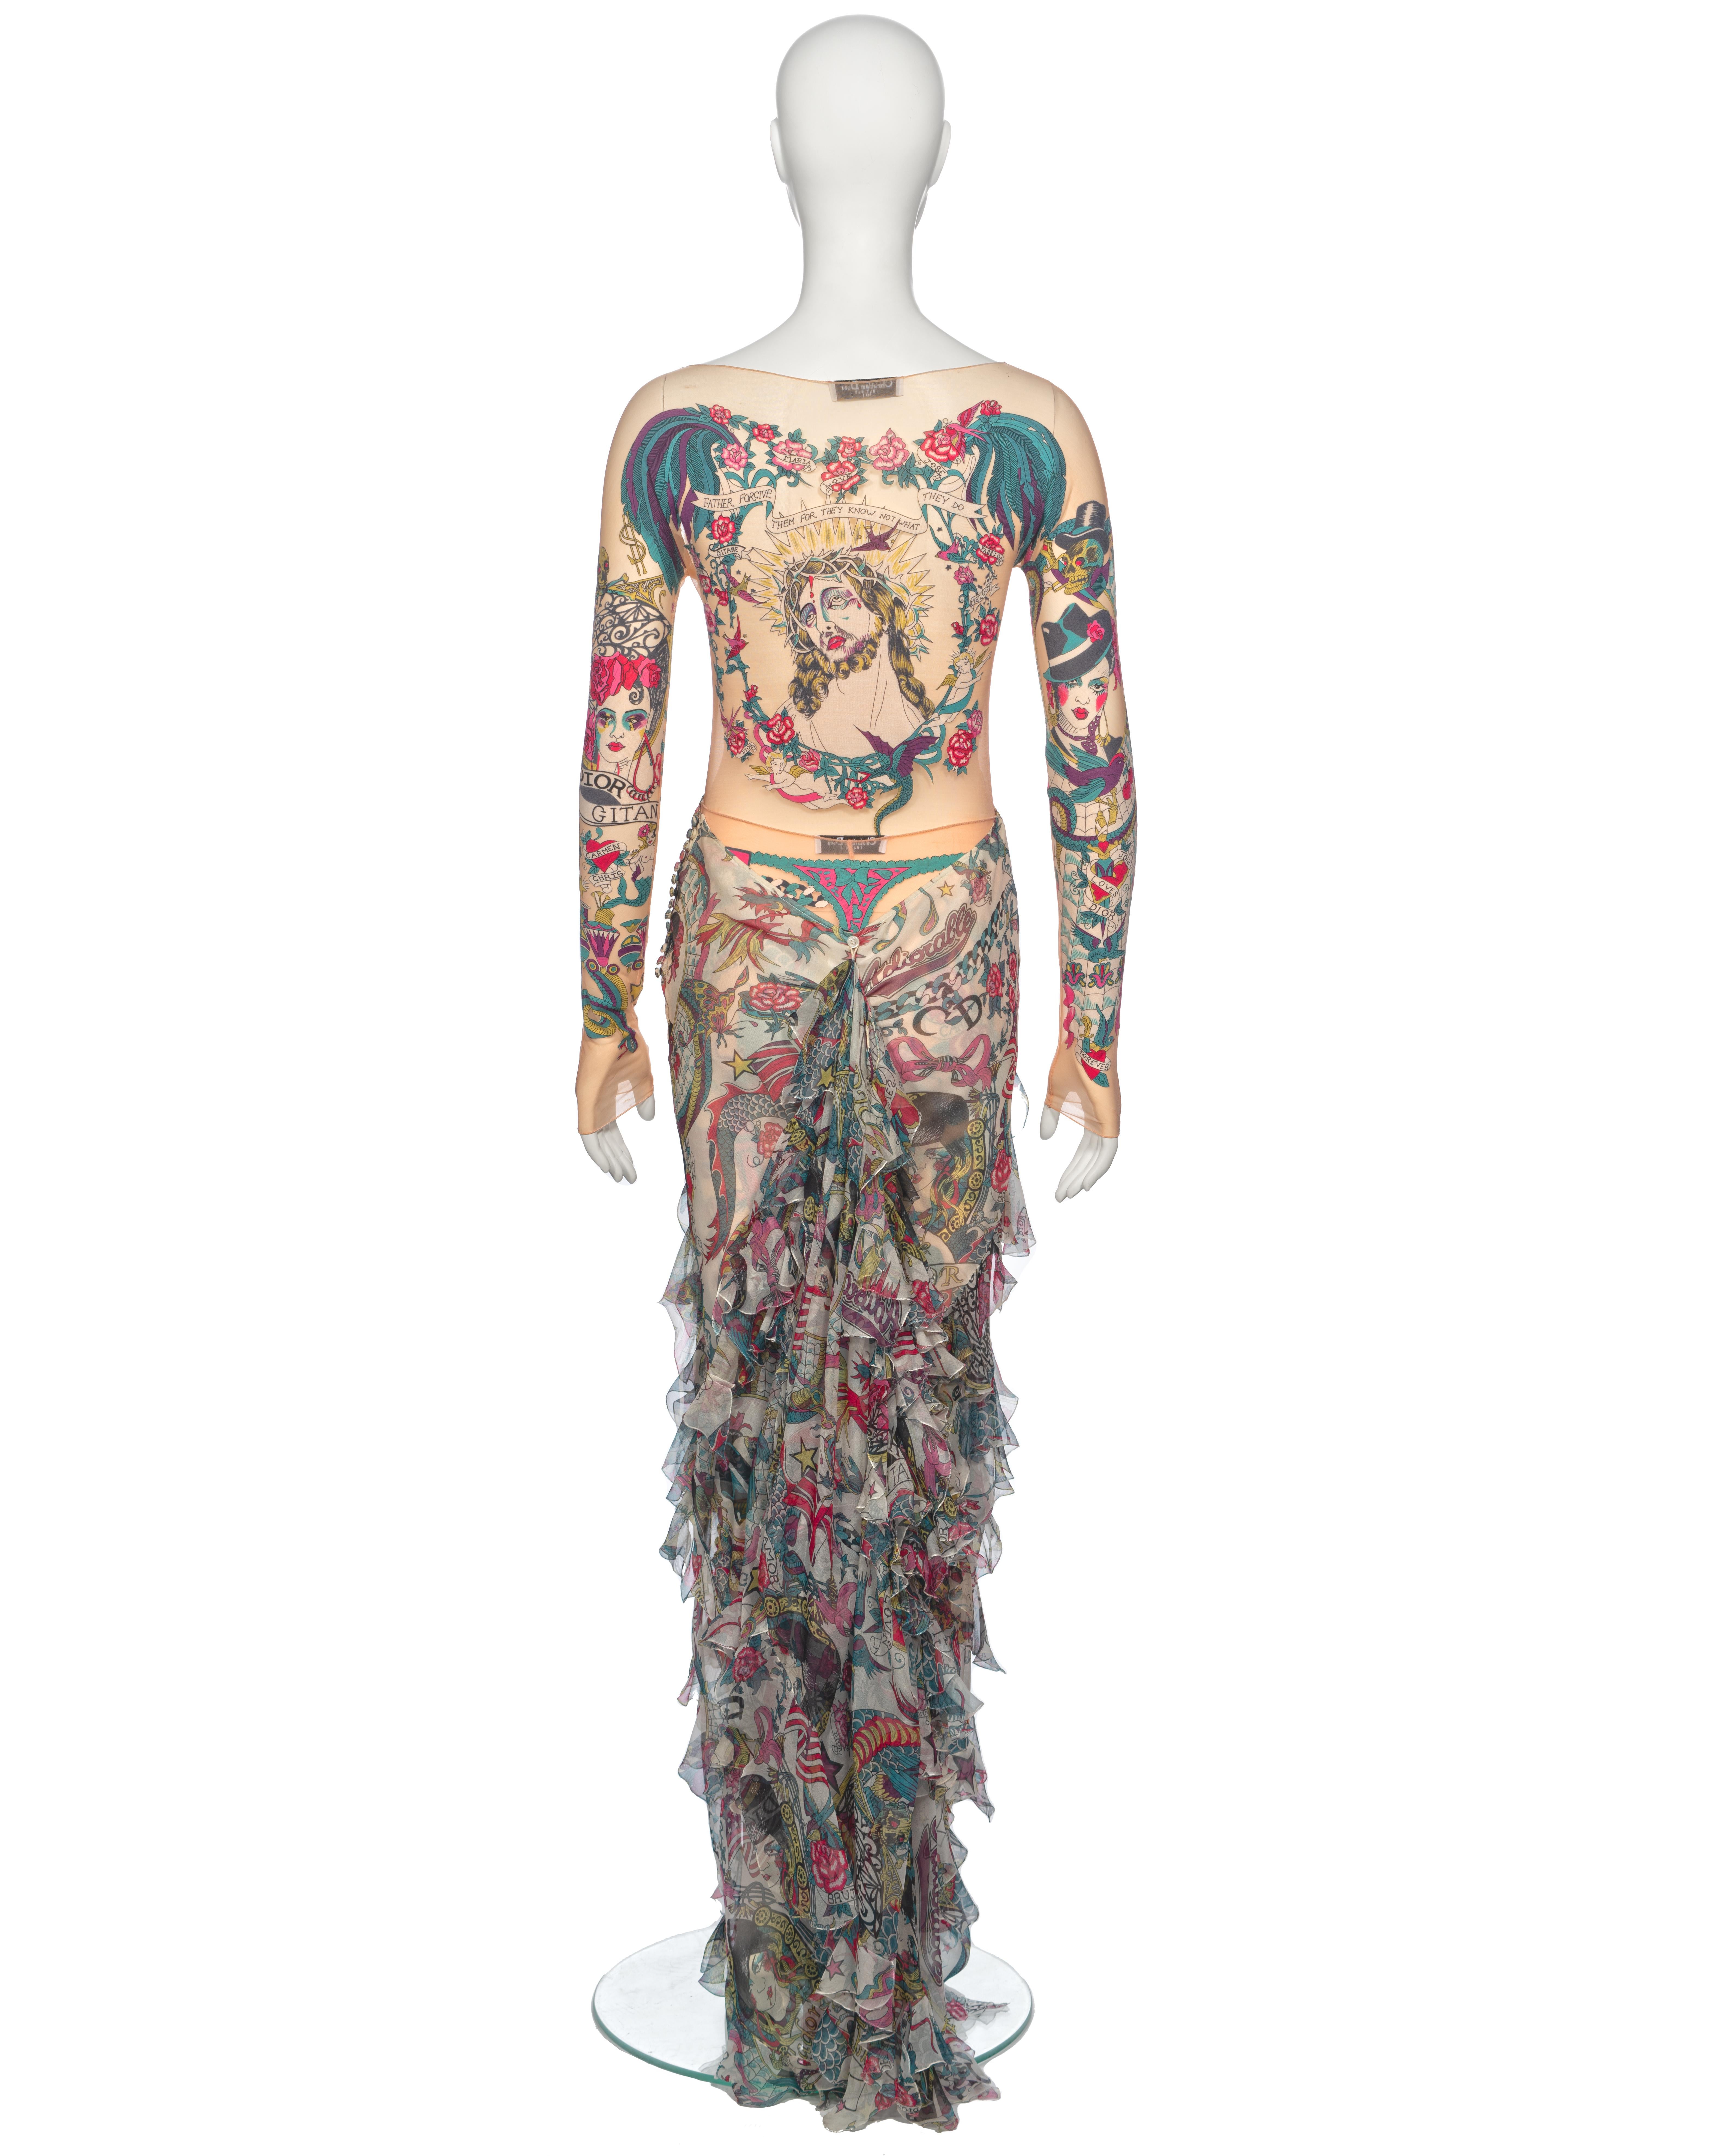 Christian Dior by John Galliano Tattoo Print Body, Leggings and Skirt, ss 2004 For Sale 12